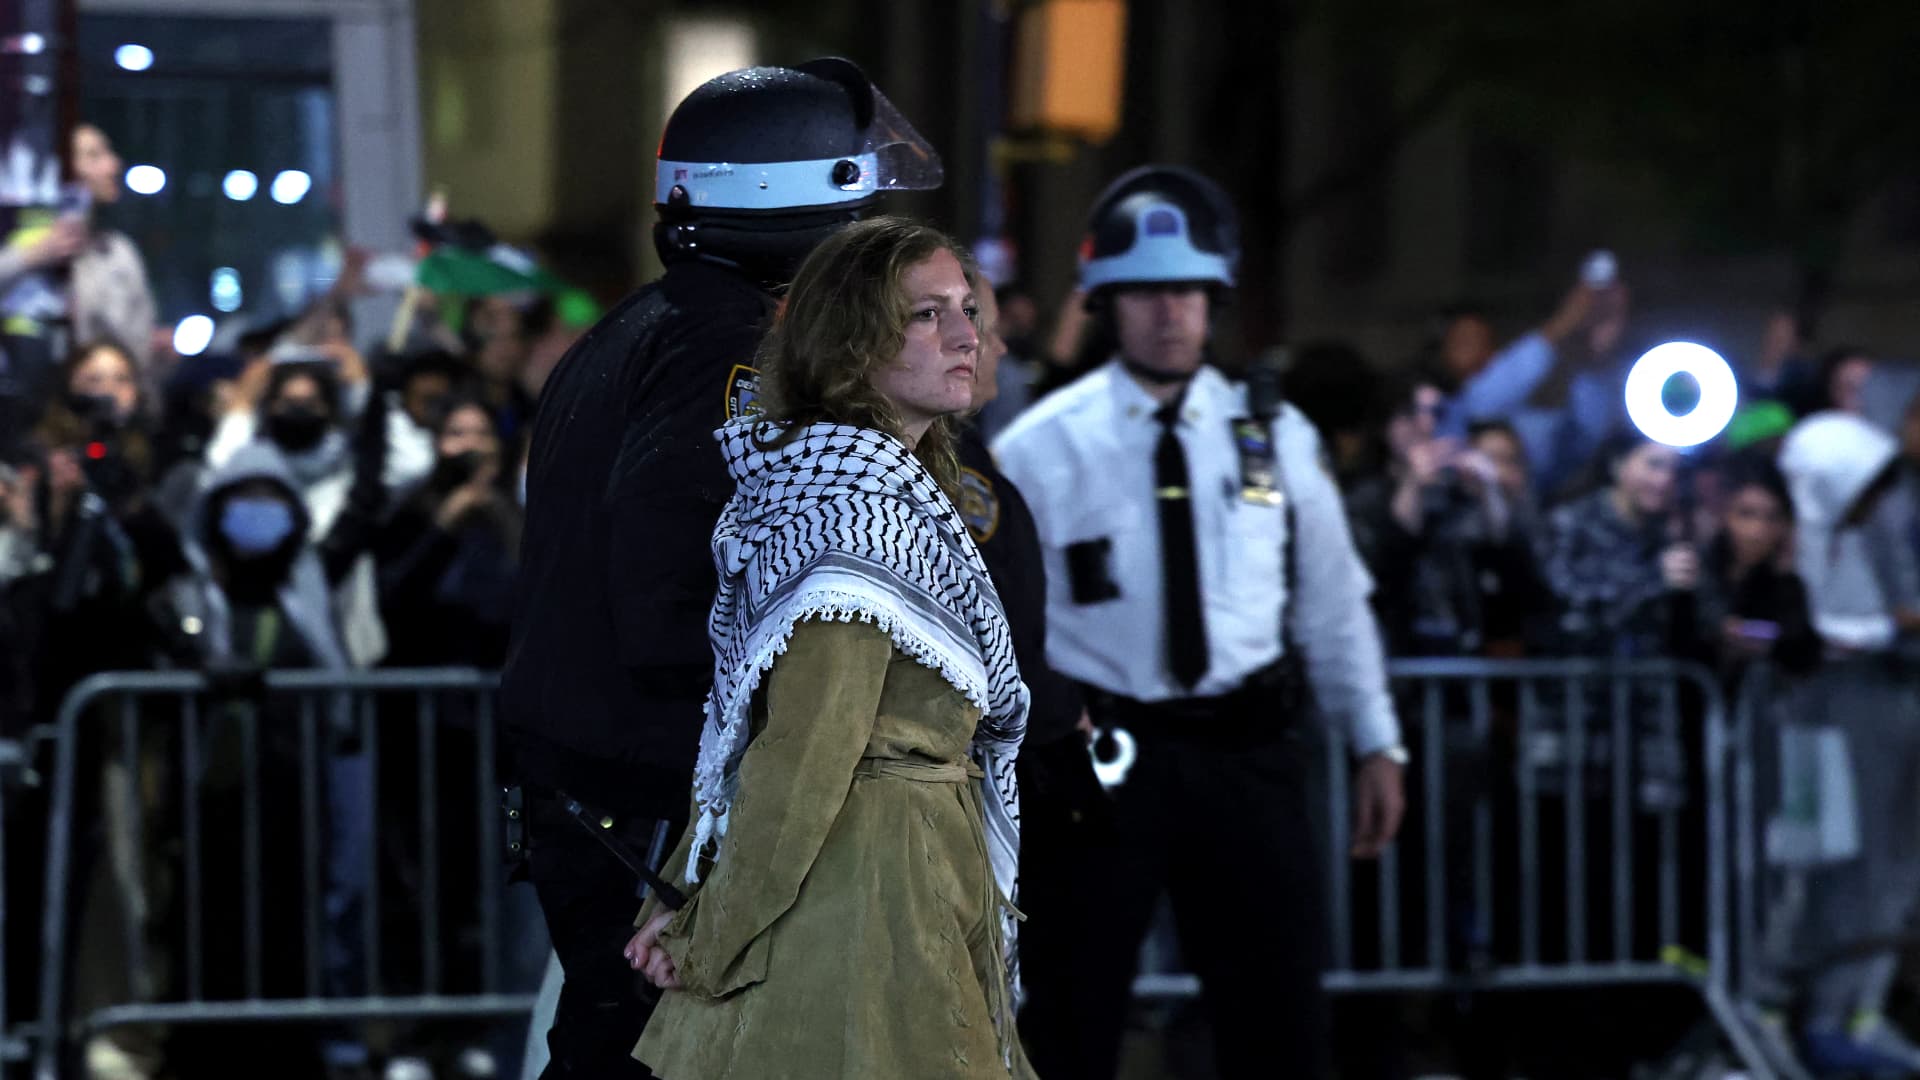 Israel backers attack pro-Palestinian camp at UCLA, as NYC law enforcement arrest 300